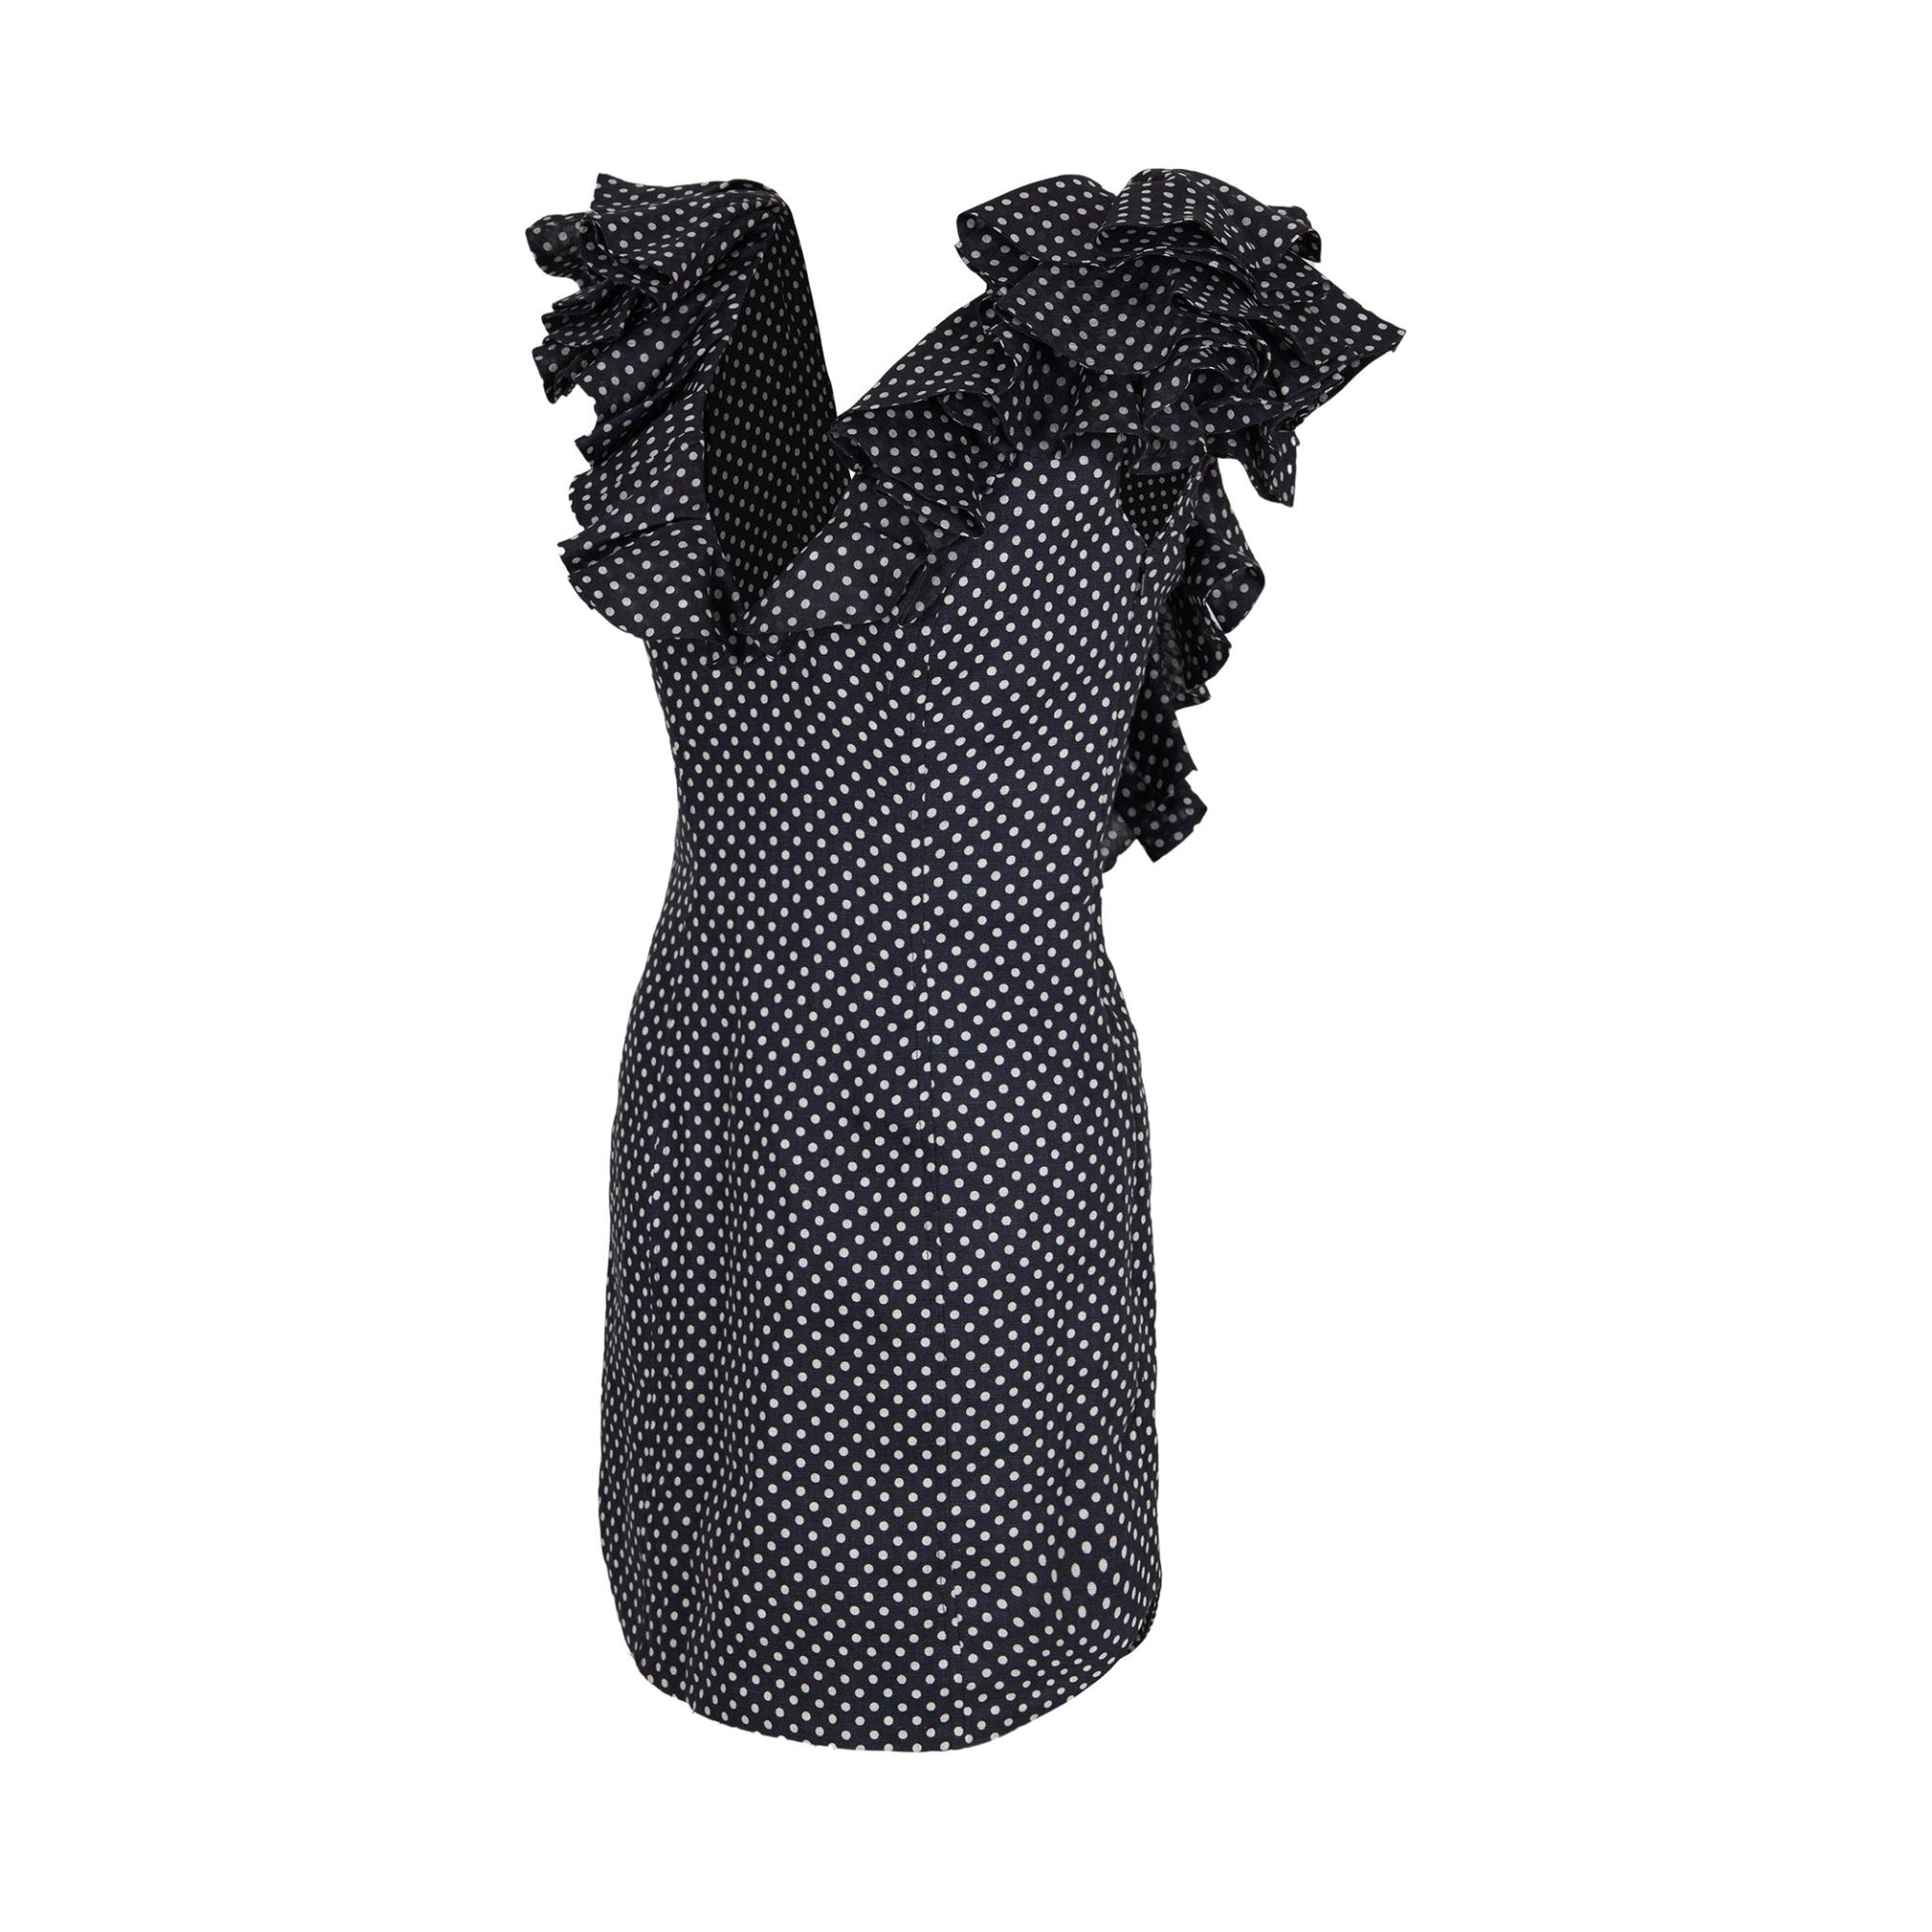 Black dress with dots and ruffles on sleeves